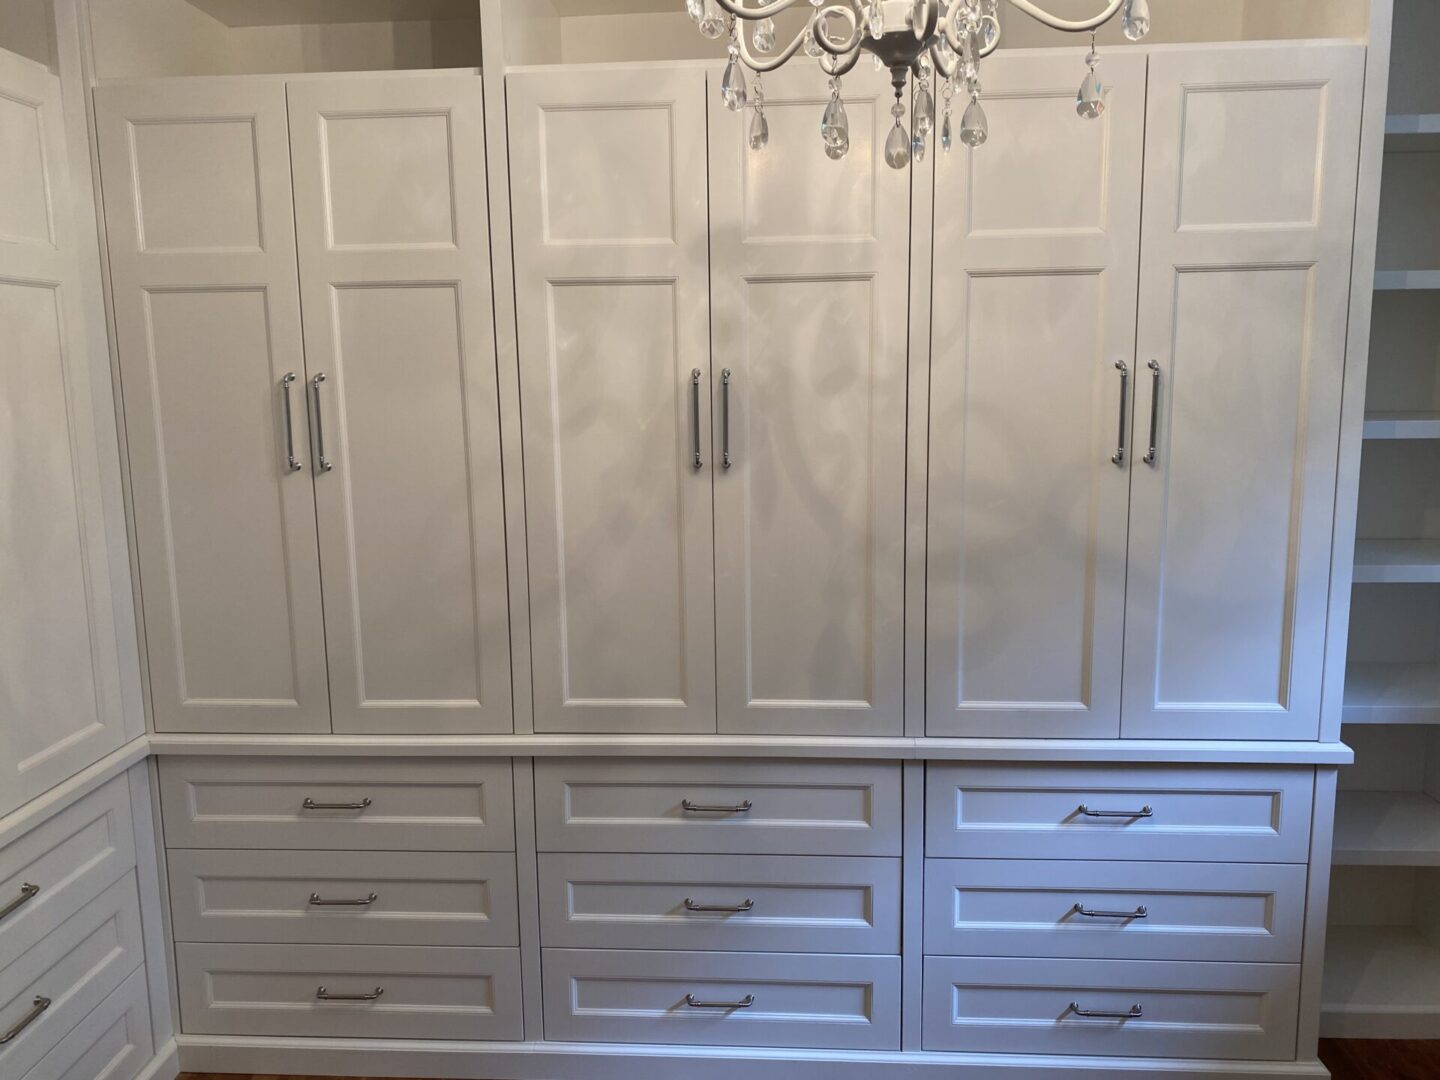 A White Color Cabinetry With Stainless Steel Handel